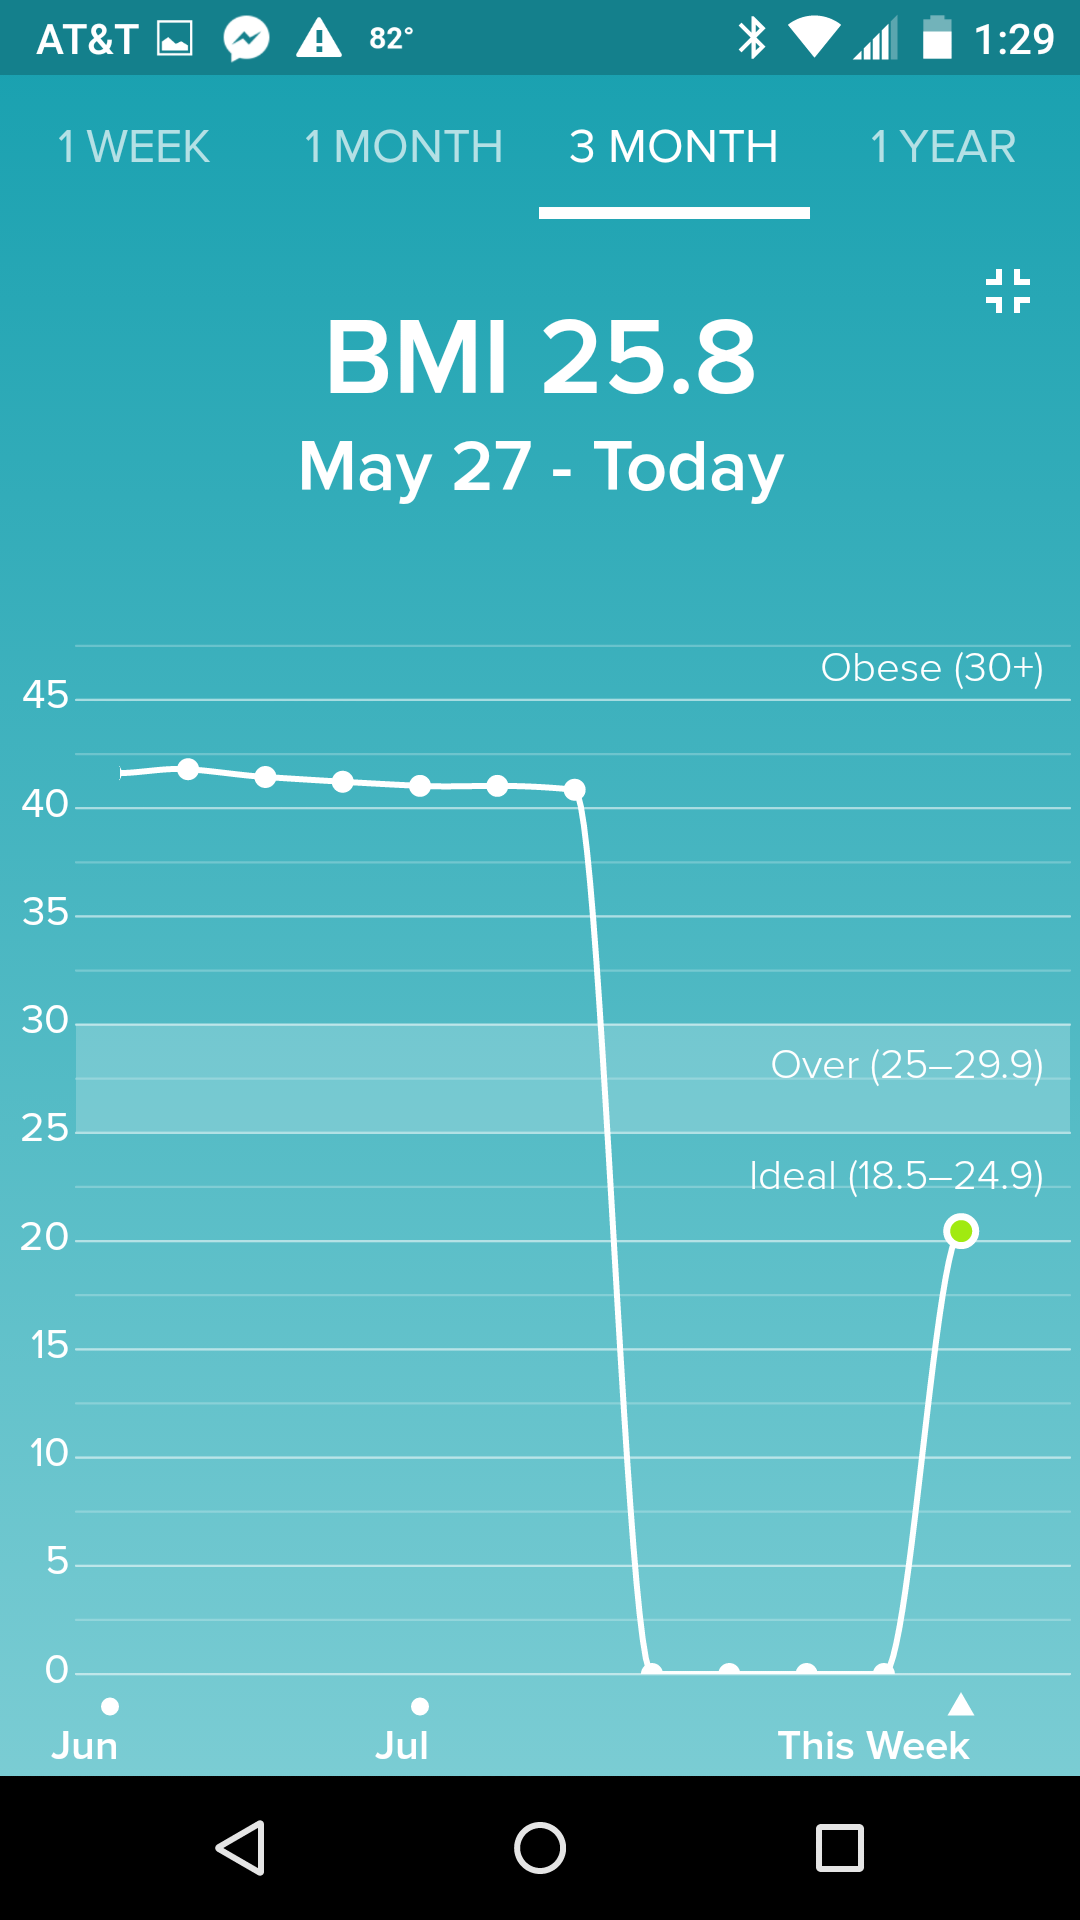 BMI after syncing with MyFitnessPal